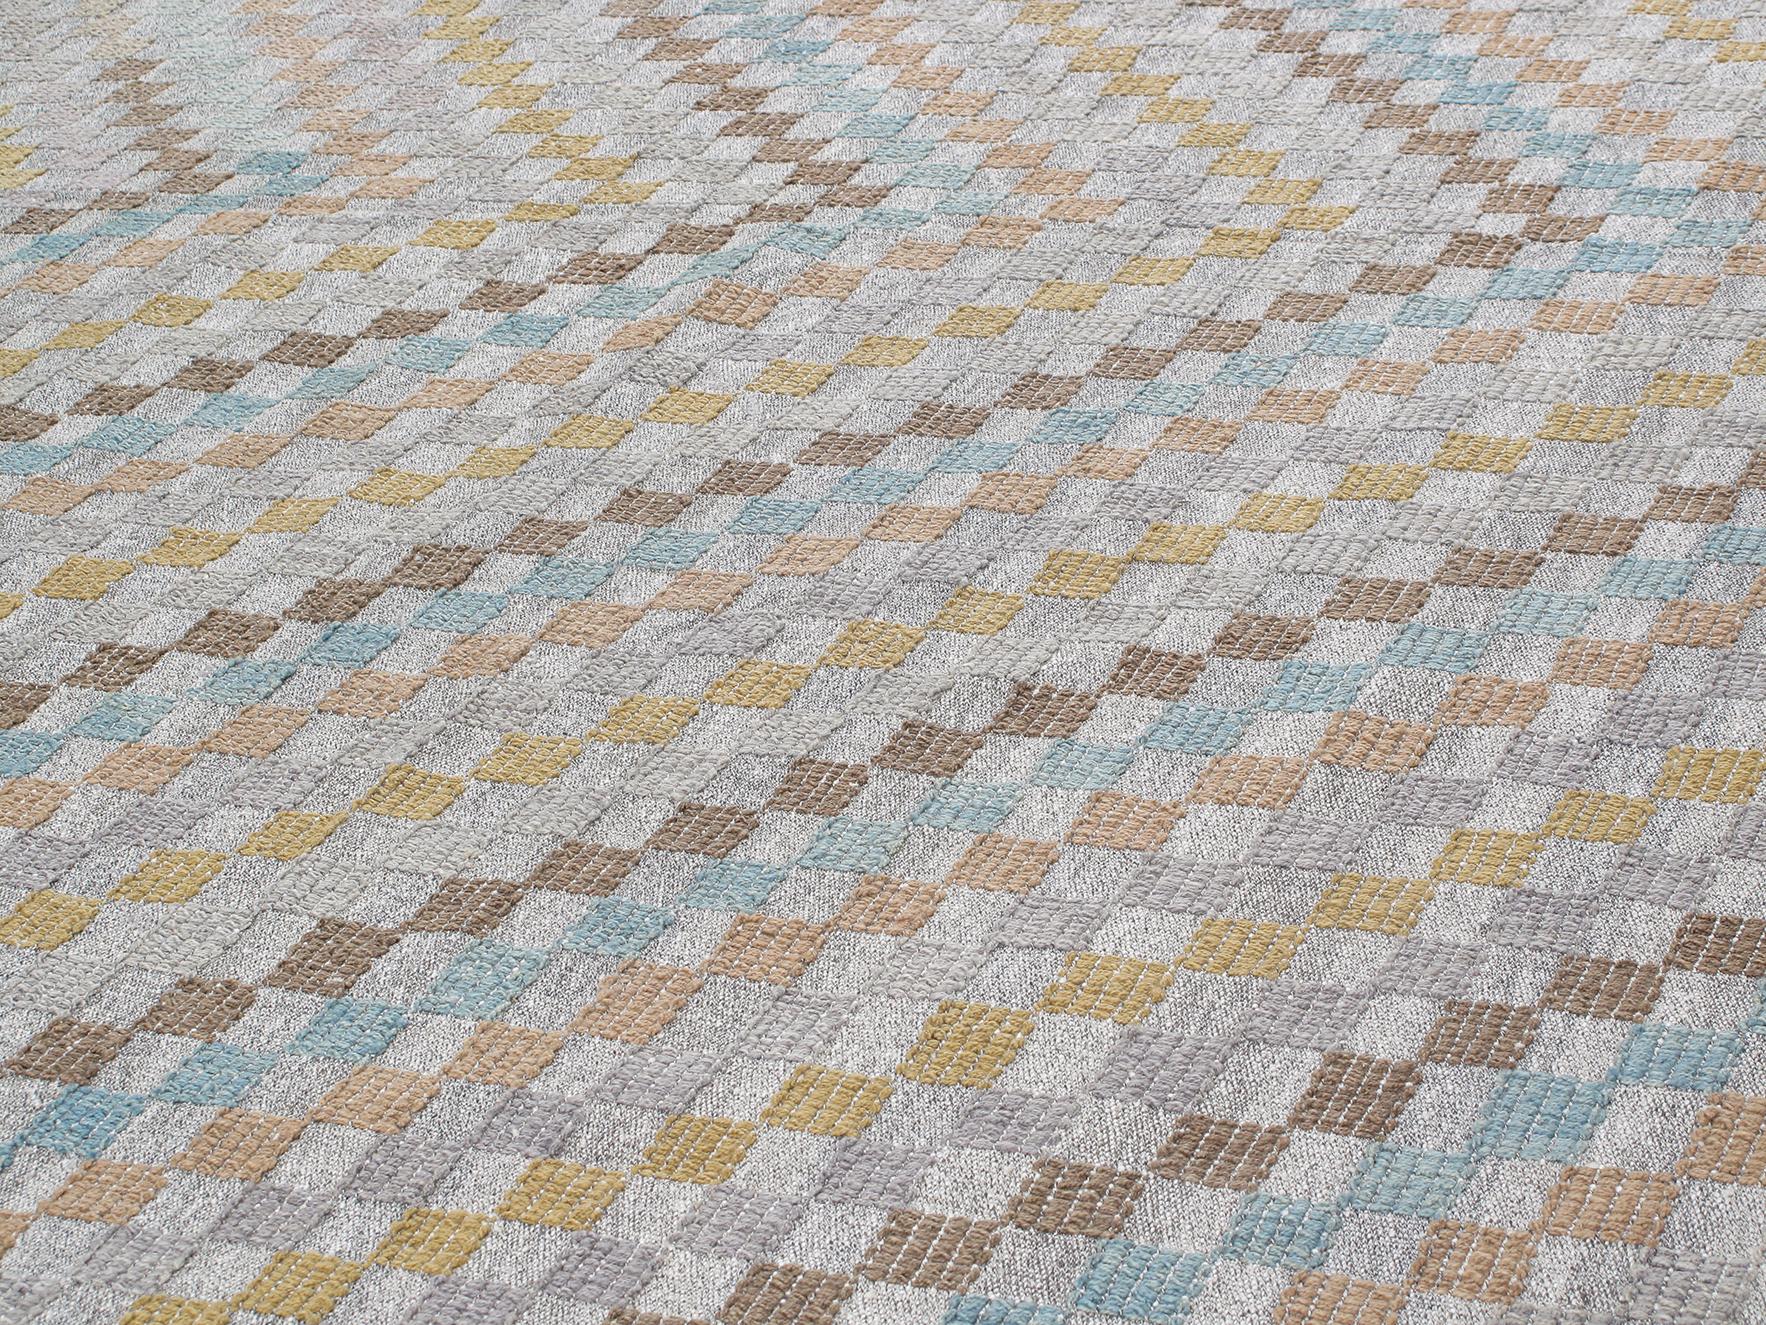 This Pelas flatweave rug is made with handspun wool and natural dyes. It is inspired by the antique kilims that are native to the Kurdish region in Iran. NASIRI continues their rich tradition of rug making by applying the same techniques and methods